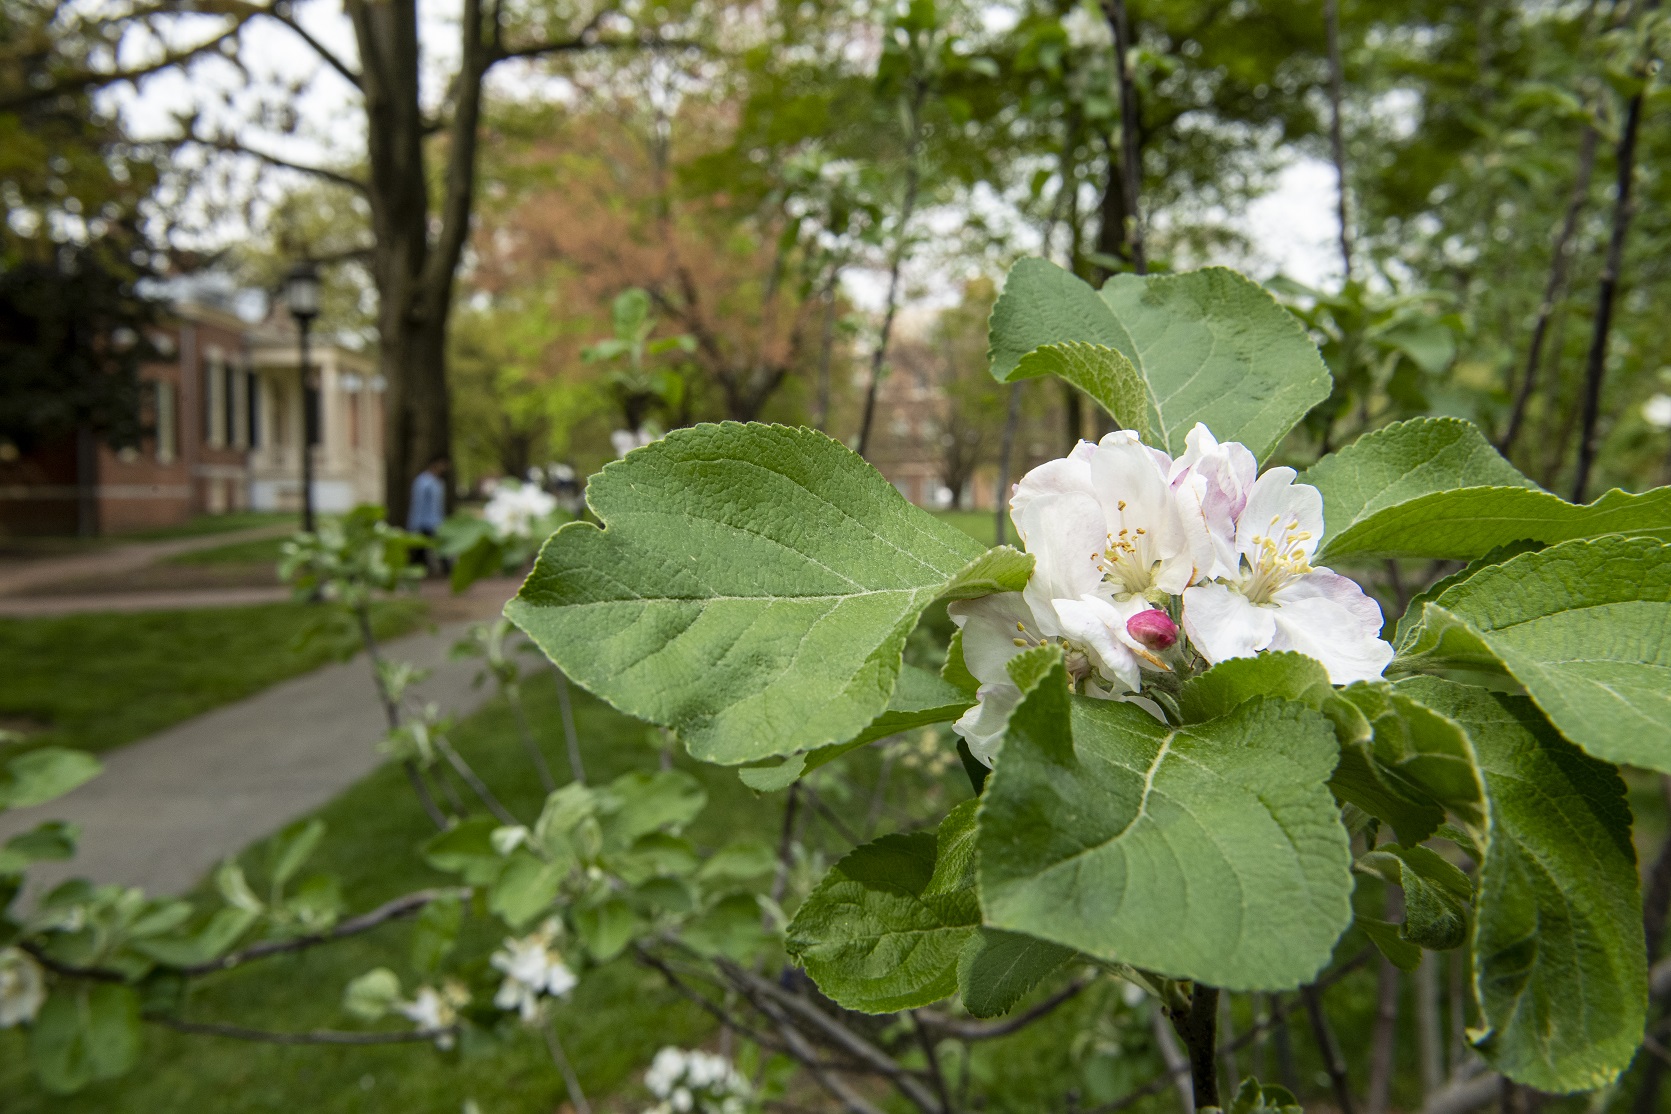 Close-up of an apple blossom with Homewood Museum visible in the background.